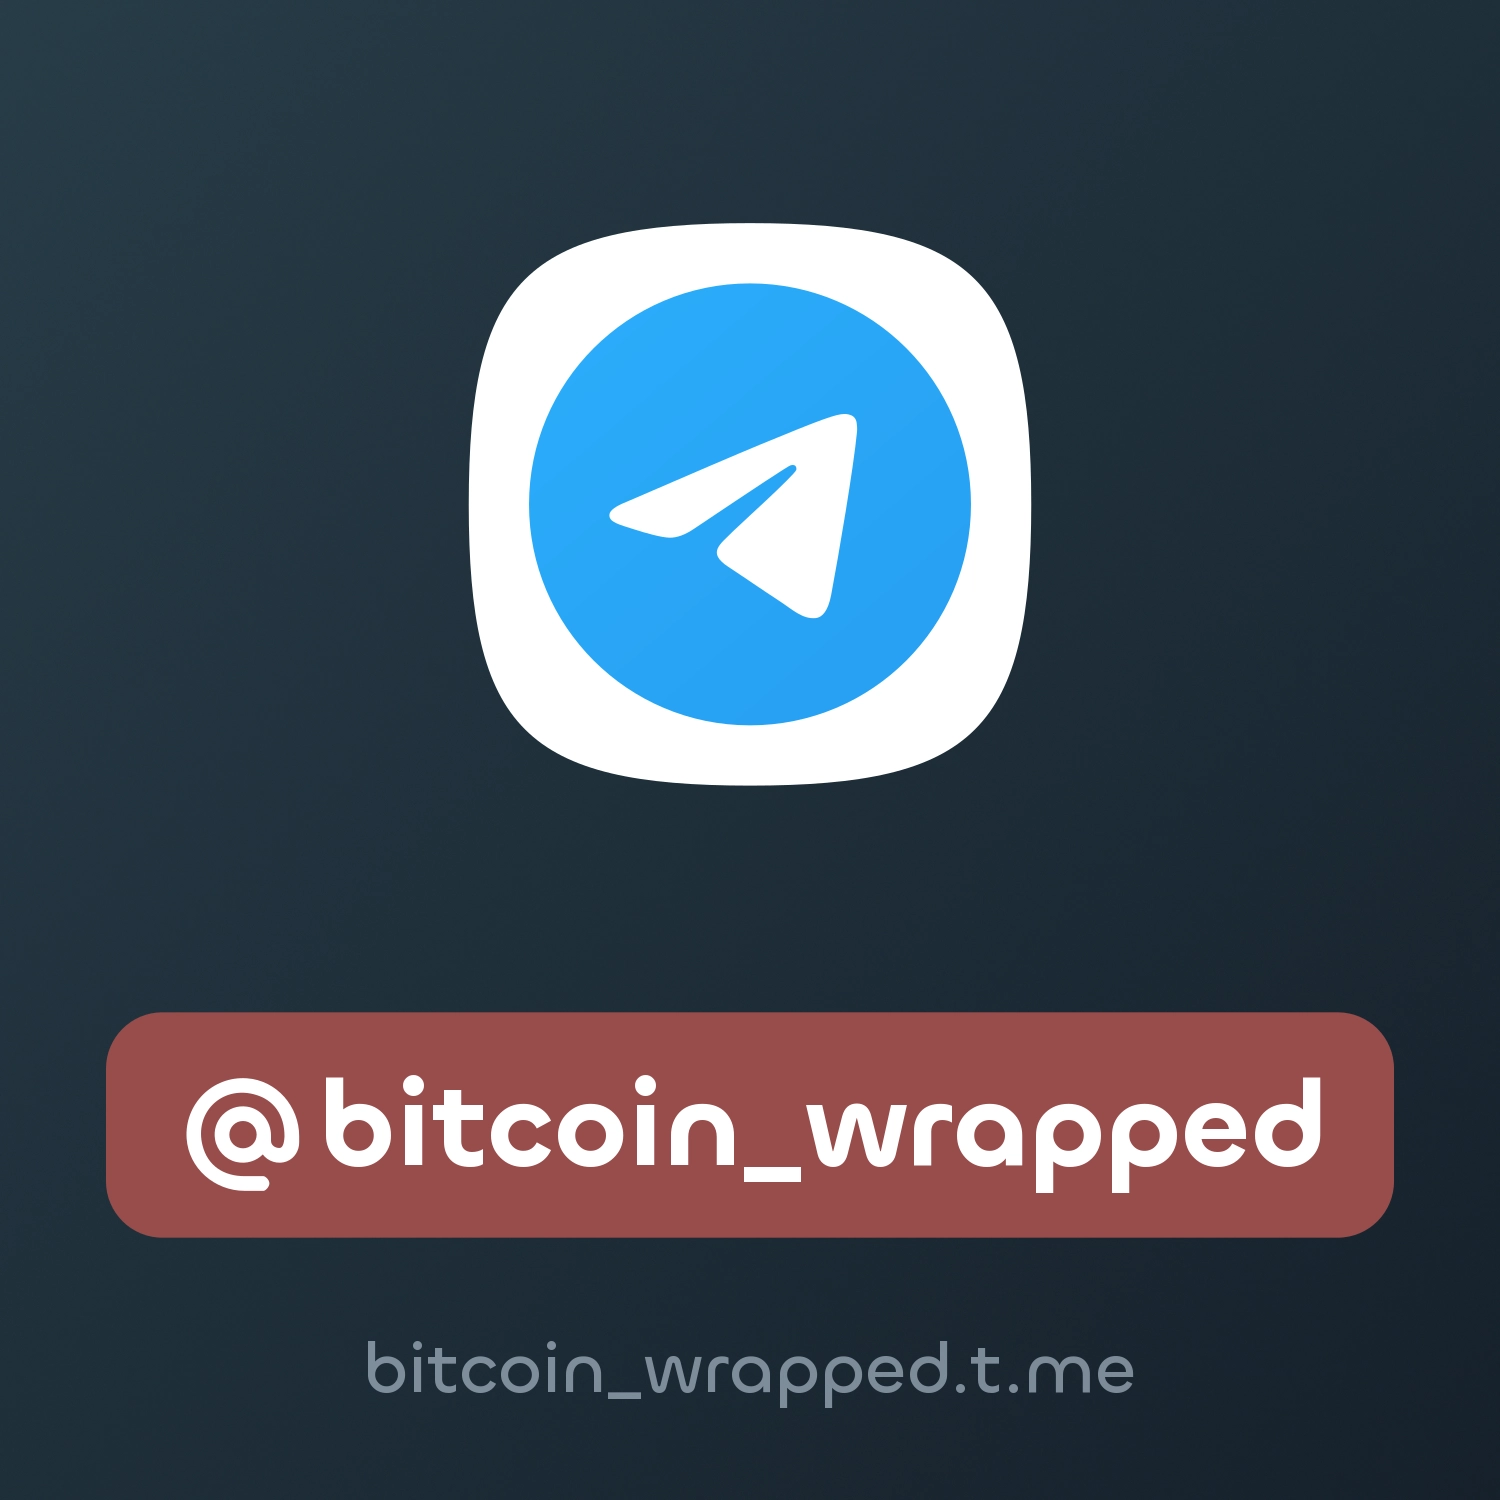 @bitcoin_wrapped